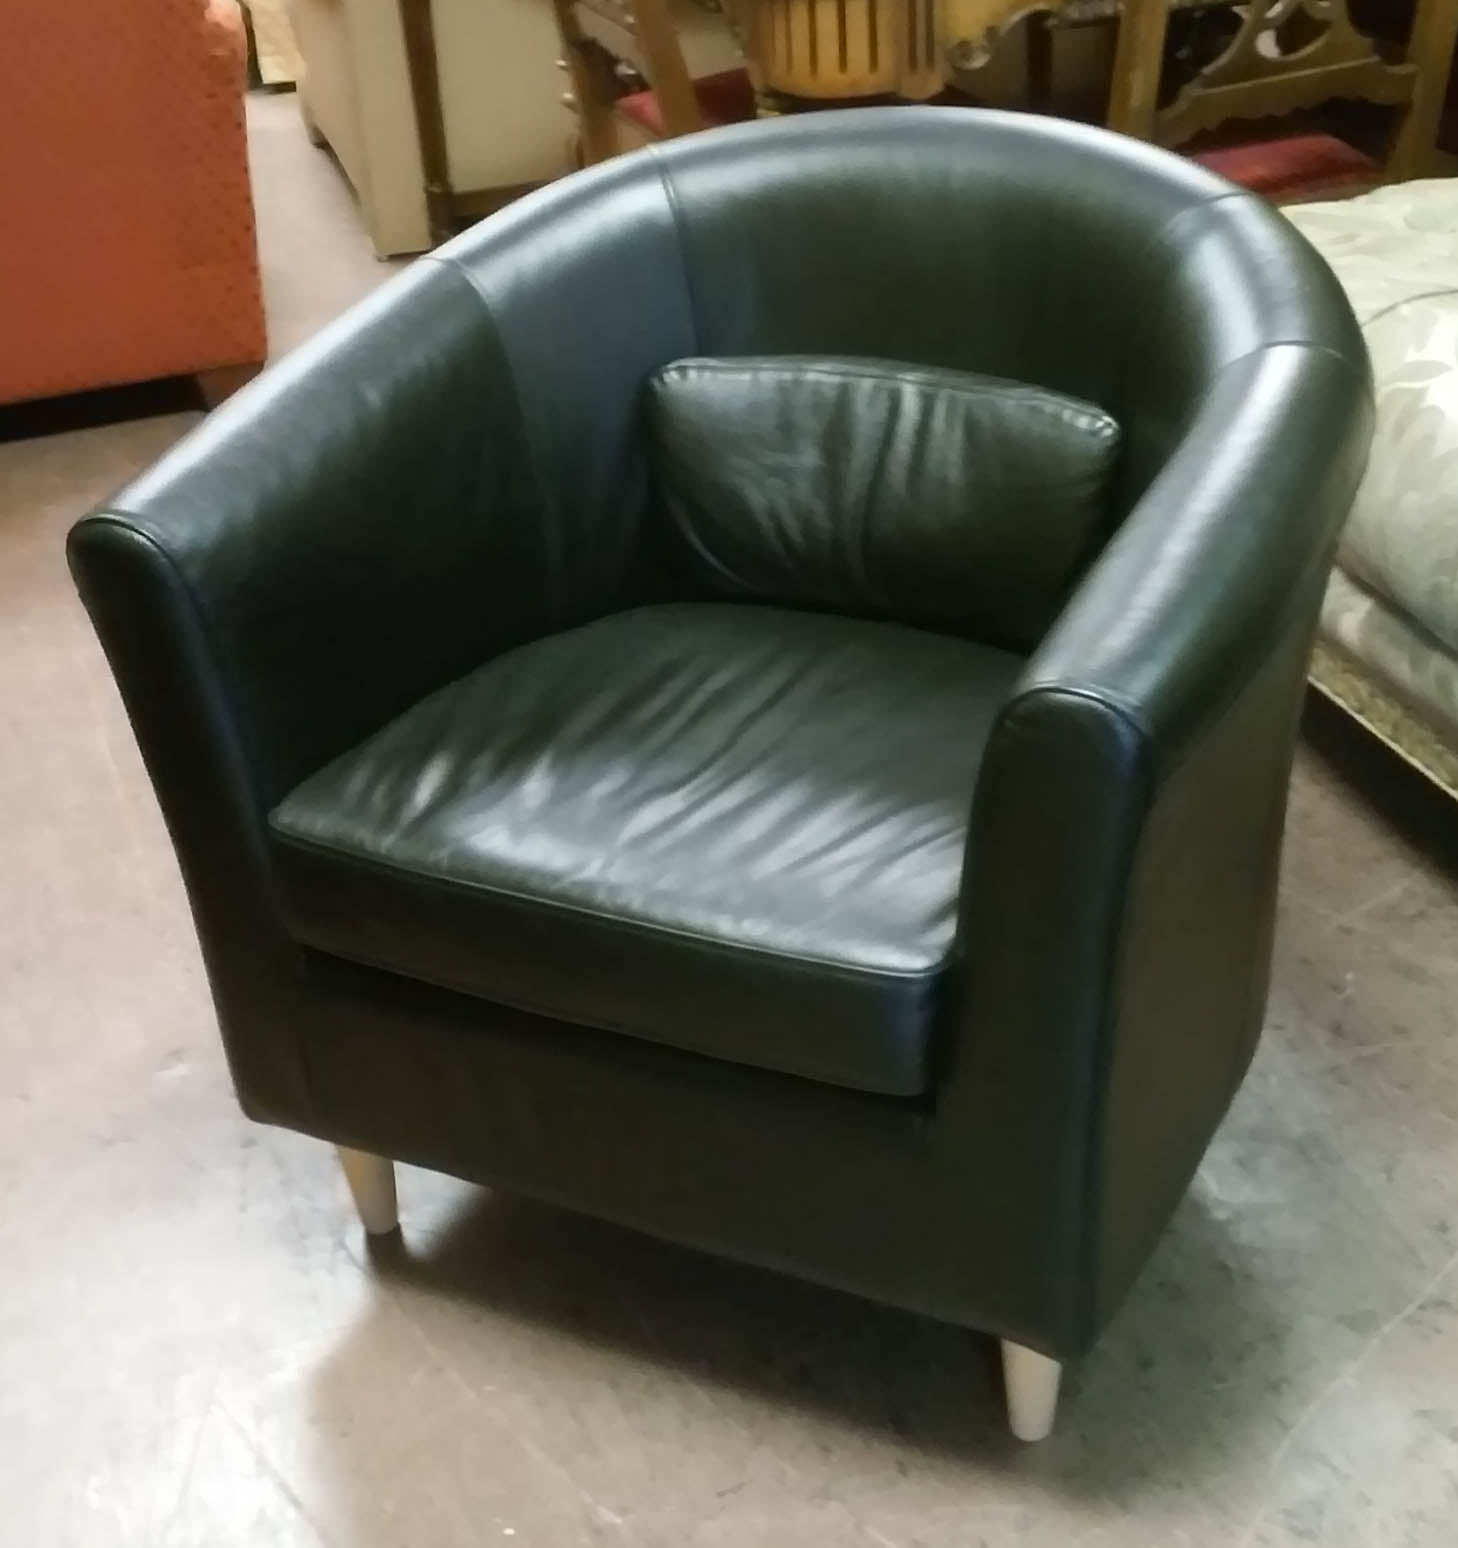 Sold Ikea Black Leather Barrel Chair, Black Leather Barrel Chair